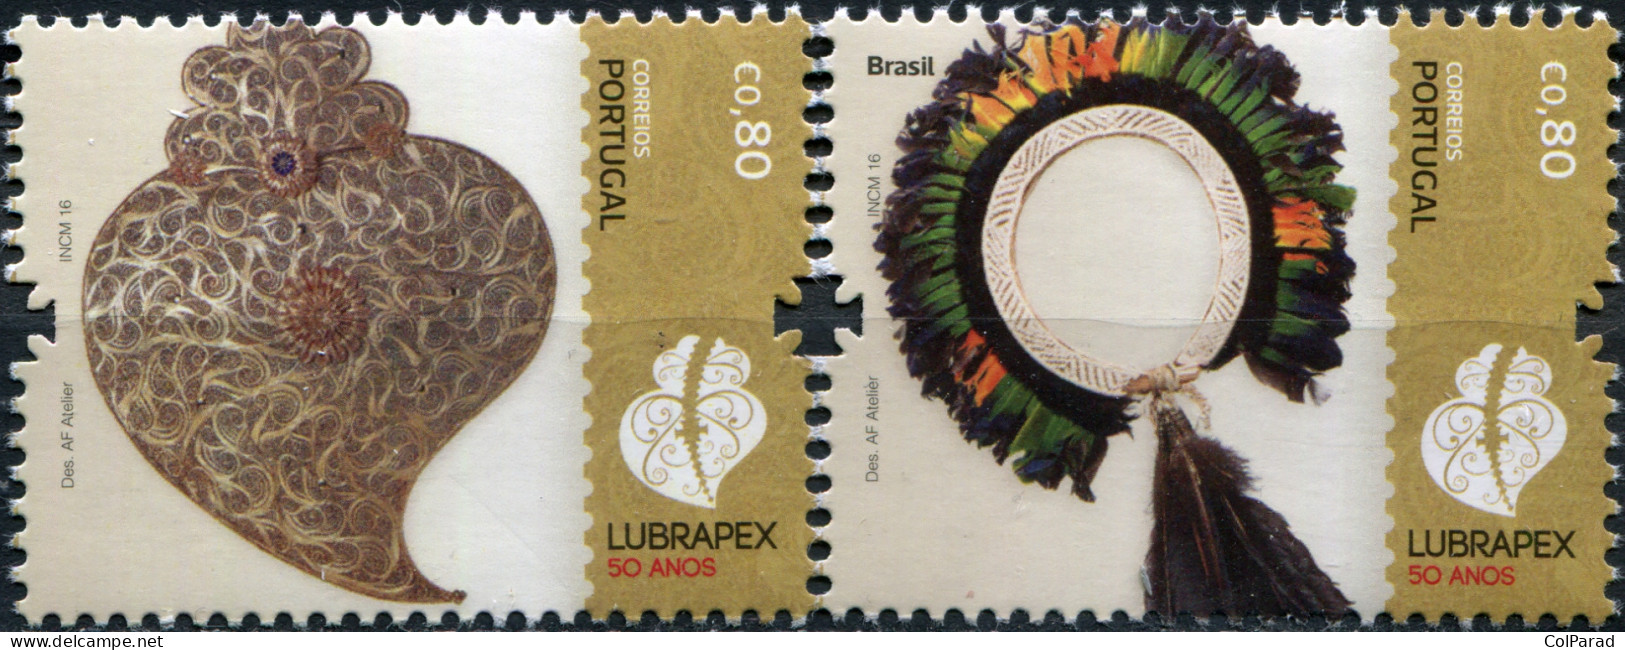 PORTUGAL - 2016 - SET OF 2 STAMPS MNH ** - 50th Anniversary Of LUBRAPEX - Ungebraucht